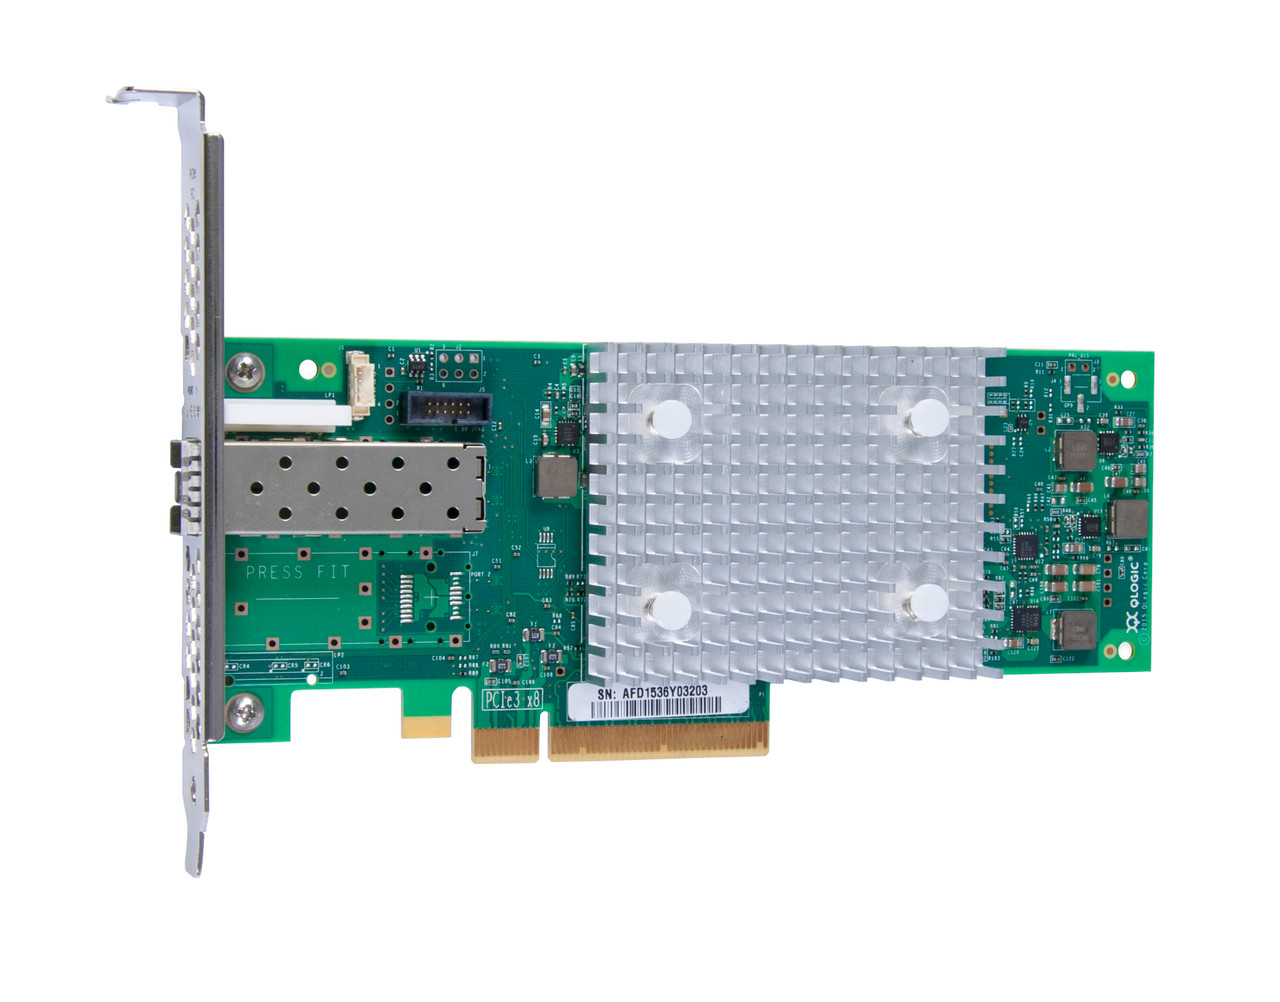 P9M75A - HPE SN1600Q 32Gb Single Port Fibre Channel Host Bus Adapter